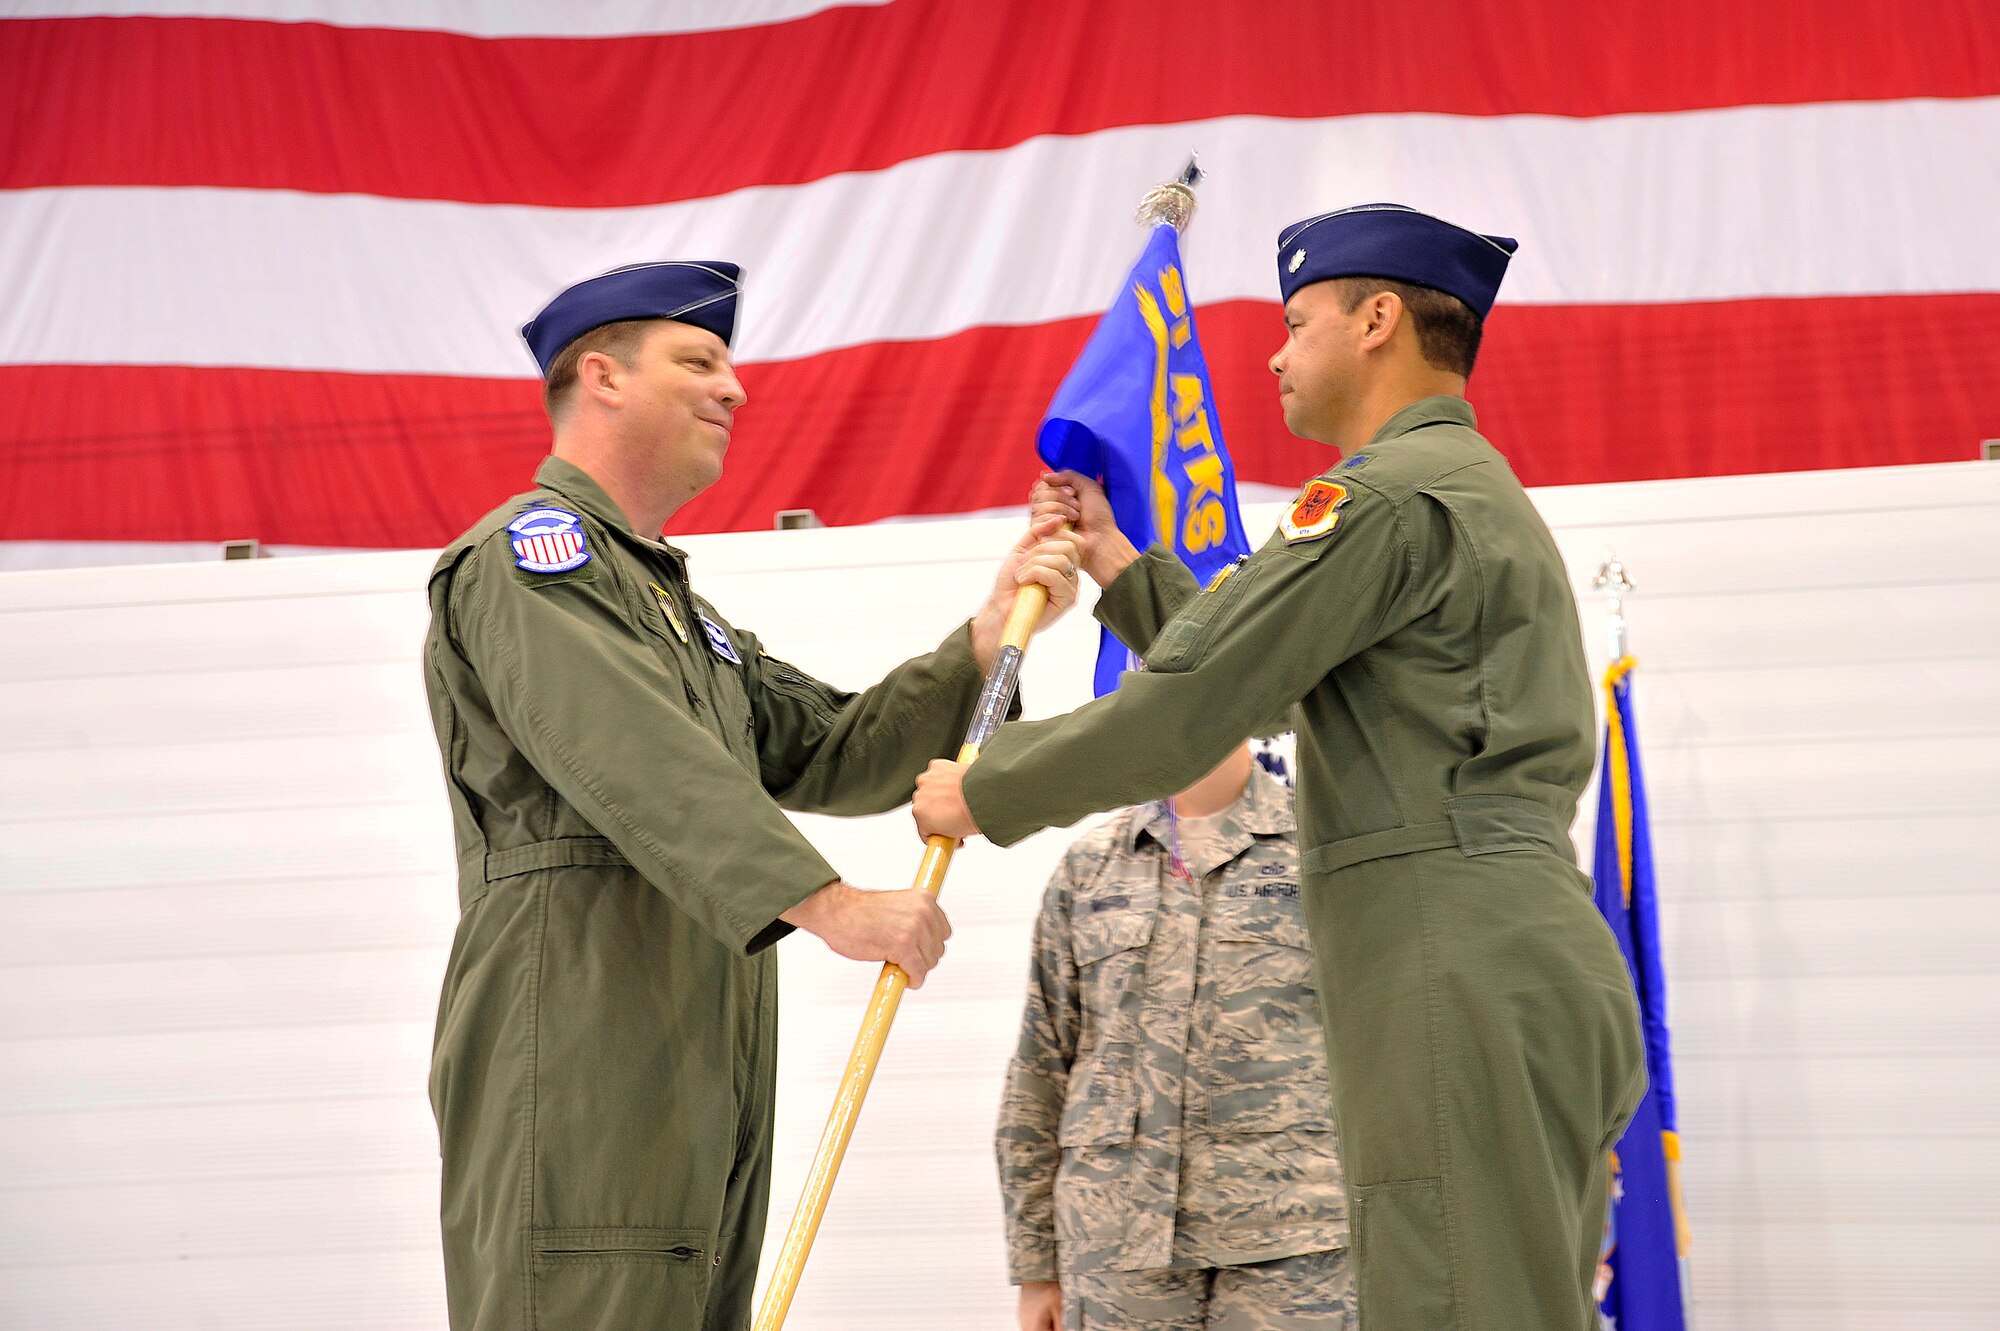 LAS VEGAS, Nev. – Col. John Breeden, 926th Group Commander, left, passes the guidon to Lt. Col. Joseph during the 91st Attack Squadron activation ceremony April 5, 2013. Flying MQ-1B Predator and MQ-9 Reaper remotely piloted aircraft, the 91st ATKS conducts worldwide operations enabling persistent, real-time intelligence, surveillance and reconnaissance. (U.S. Air Force photo by Senior Master Sgt. P.H.)